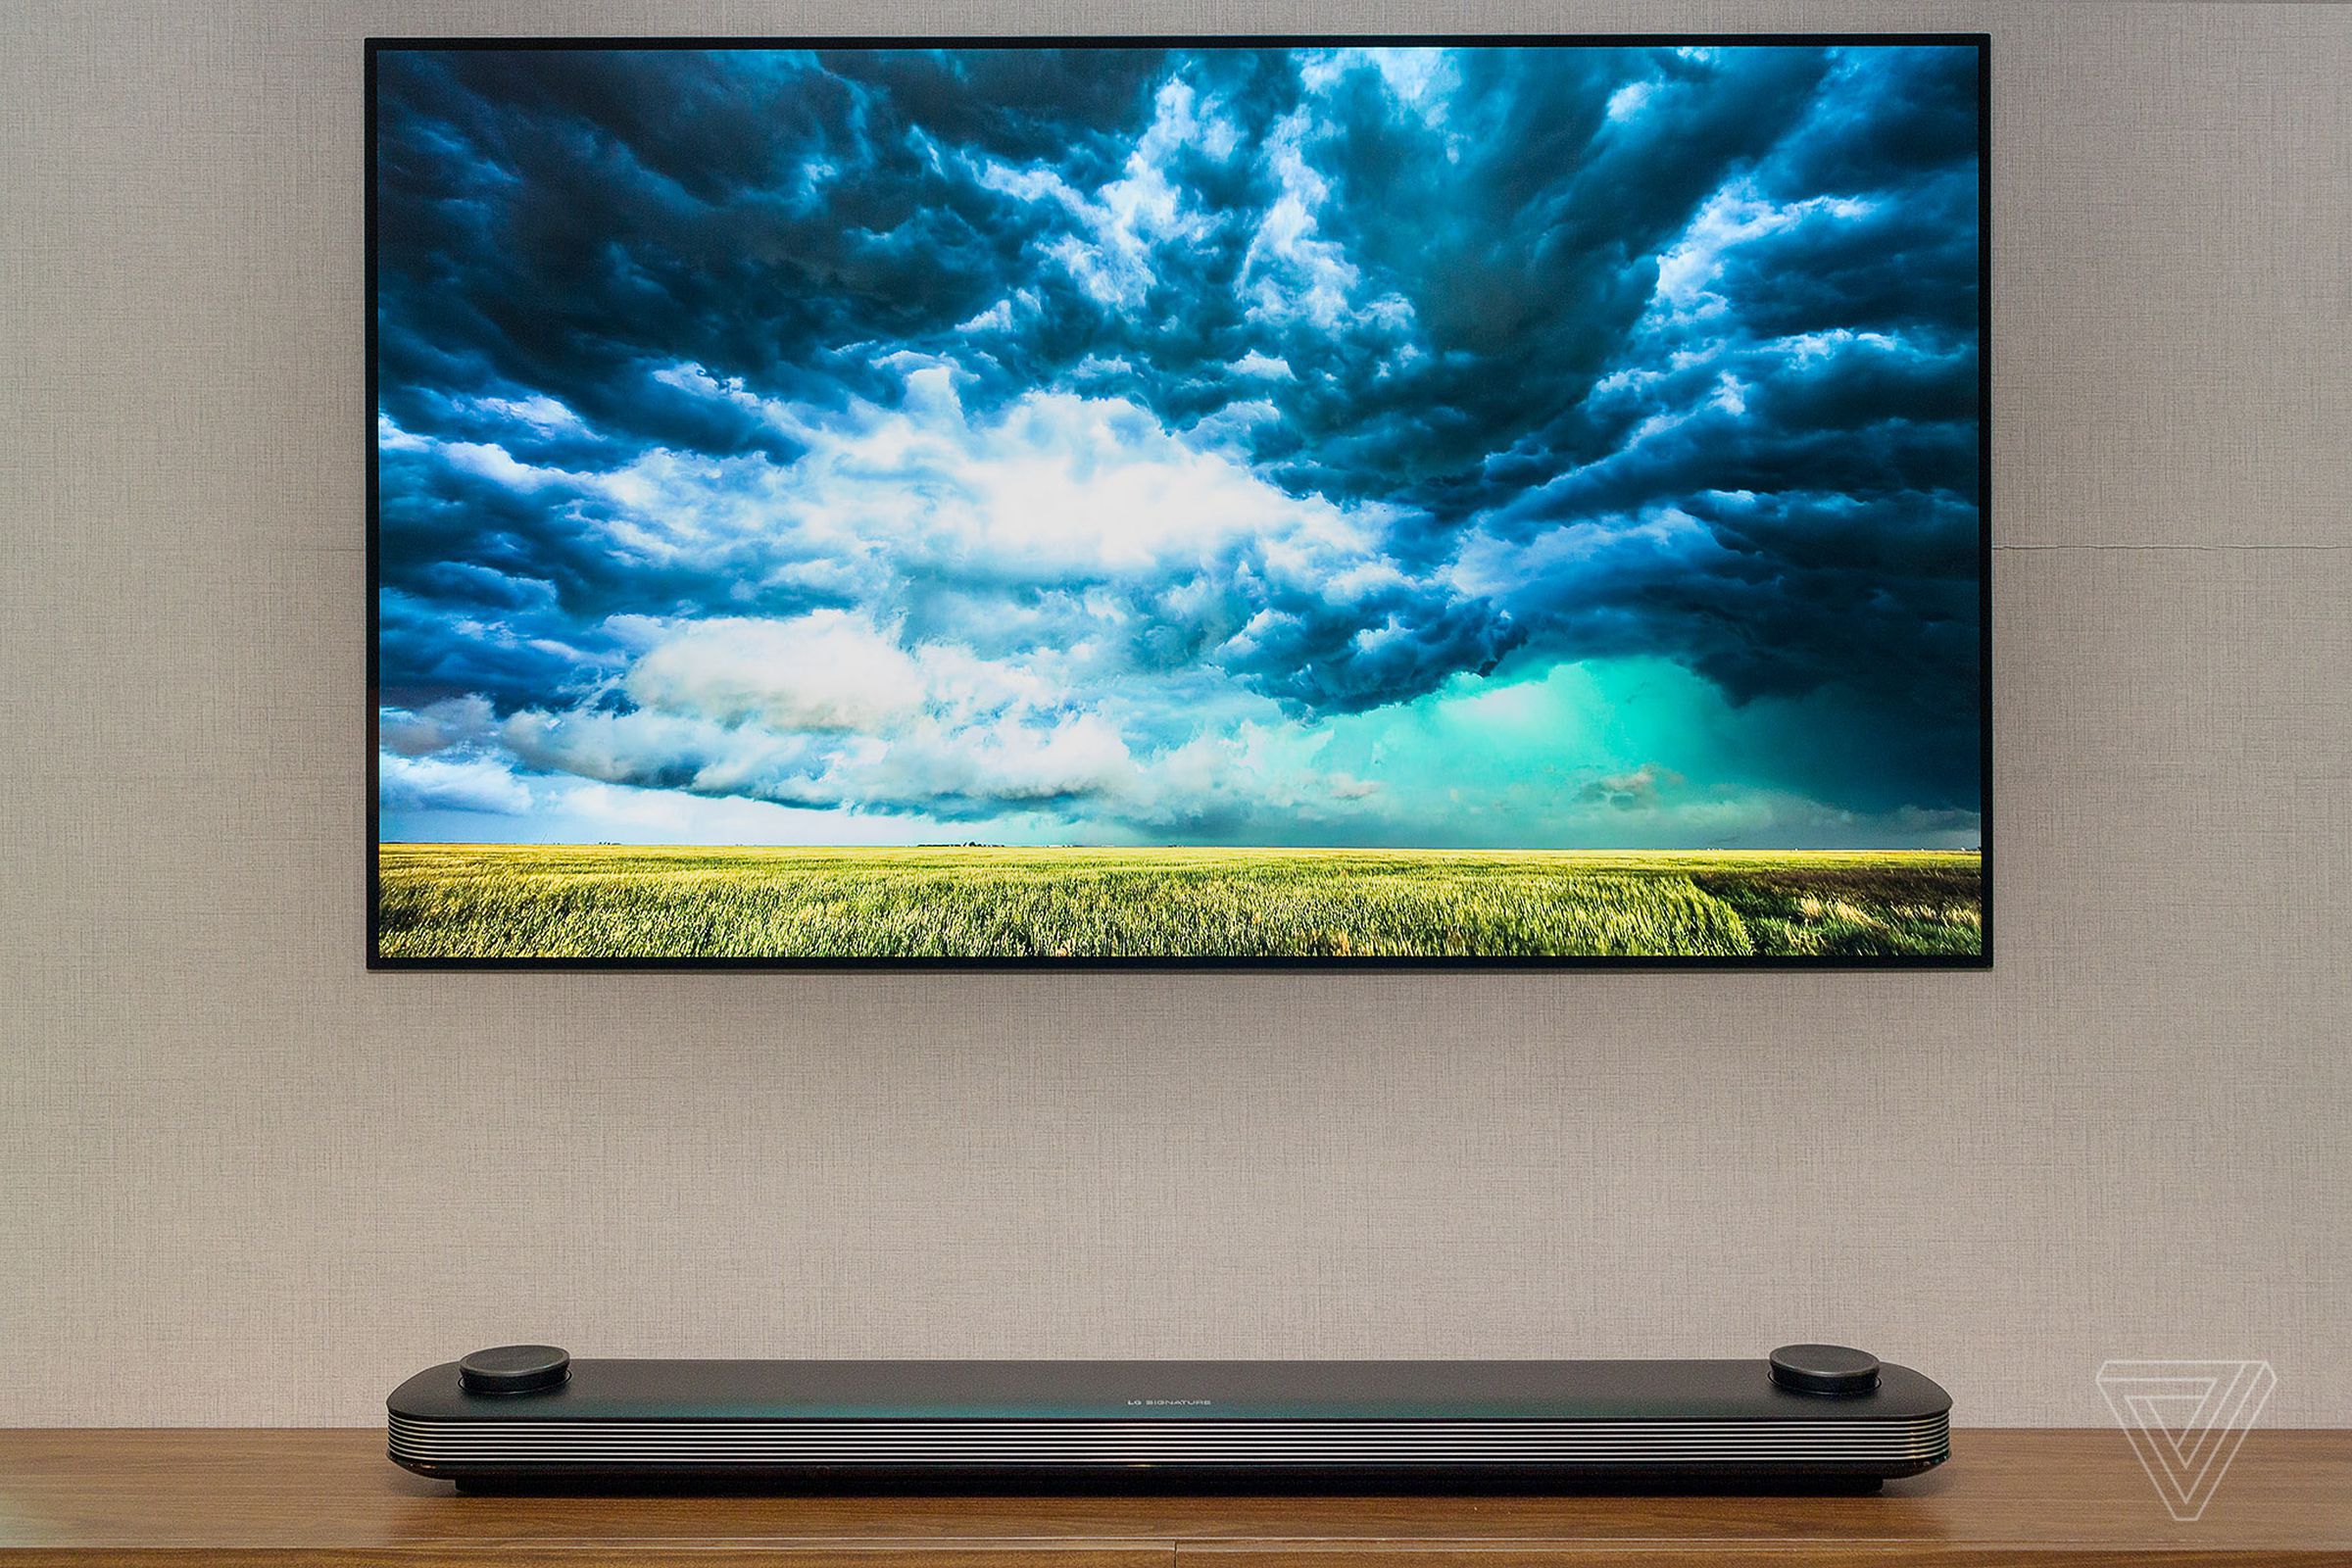 LG’s wallpaper-style OLEDs are among the models affected.